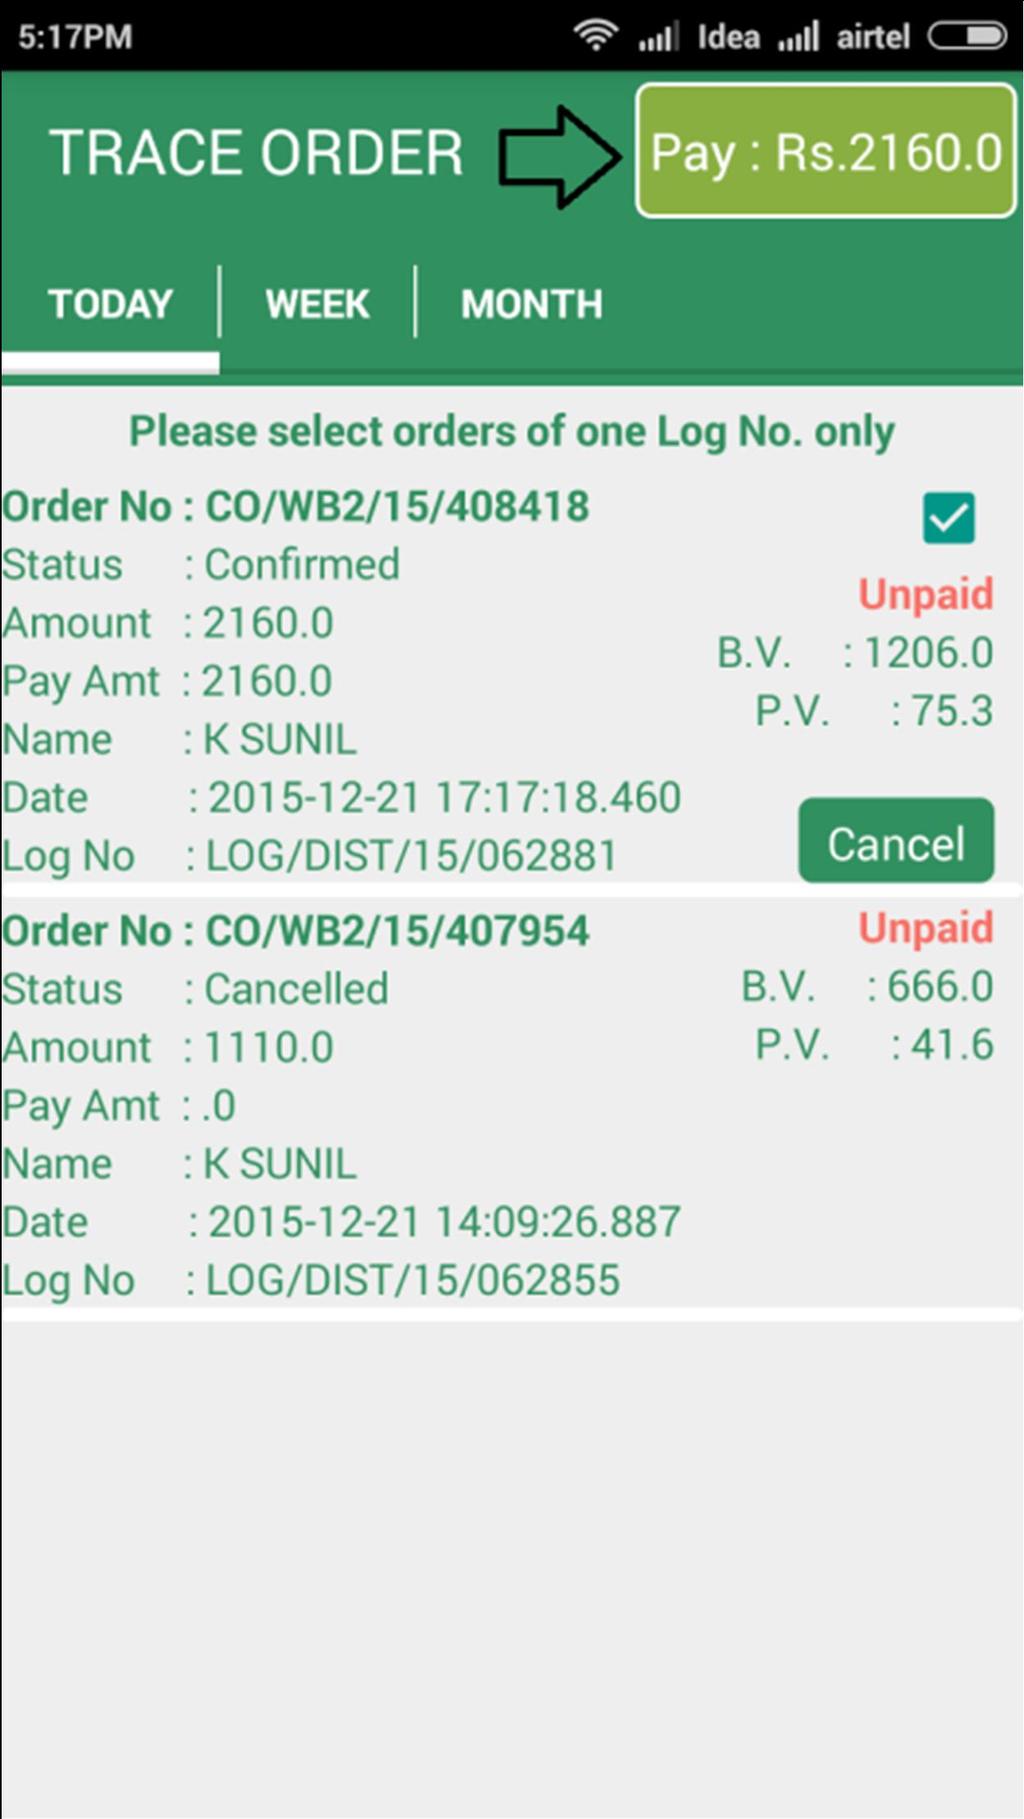 This will automatically select all orders from the log of the selected order.